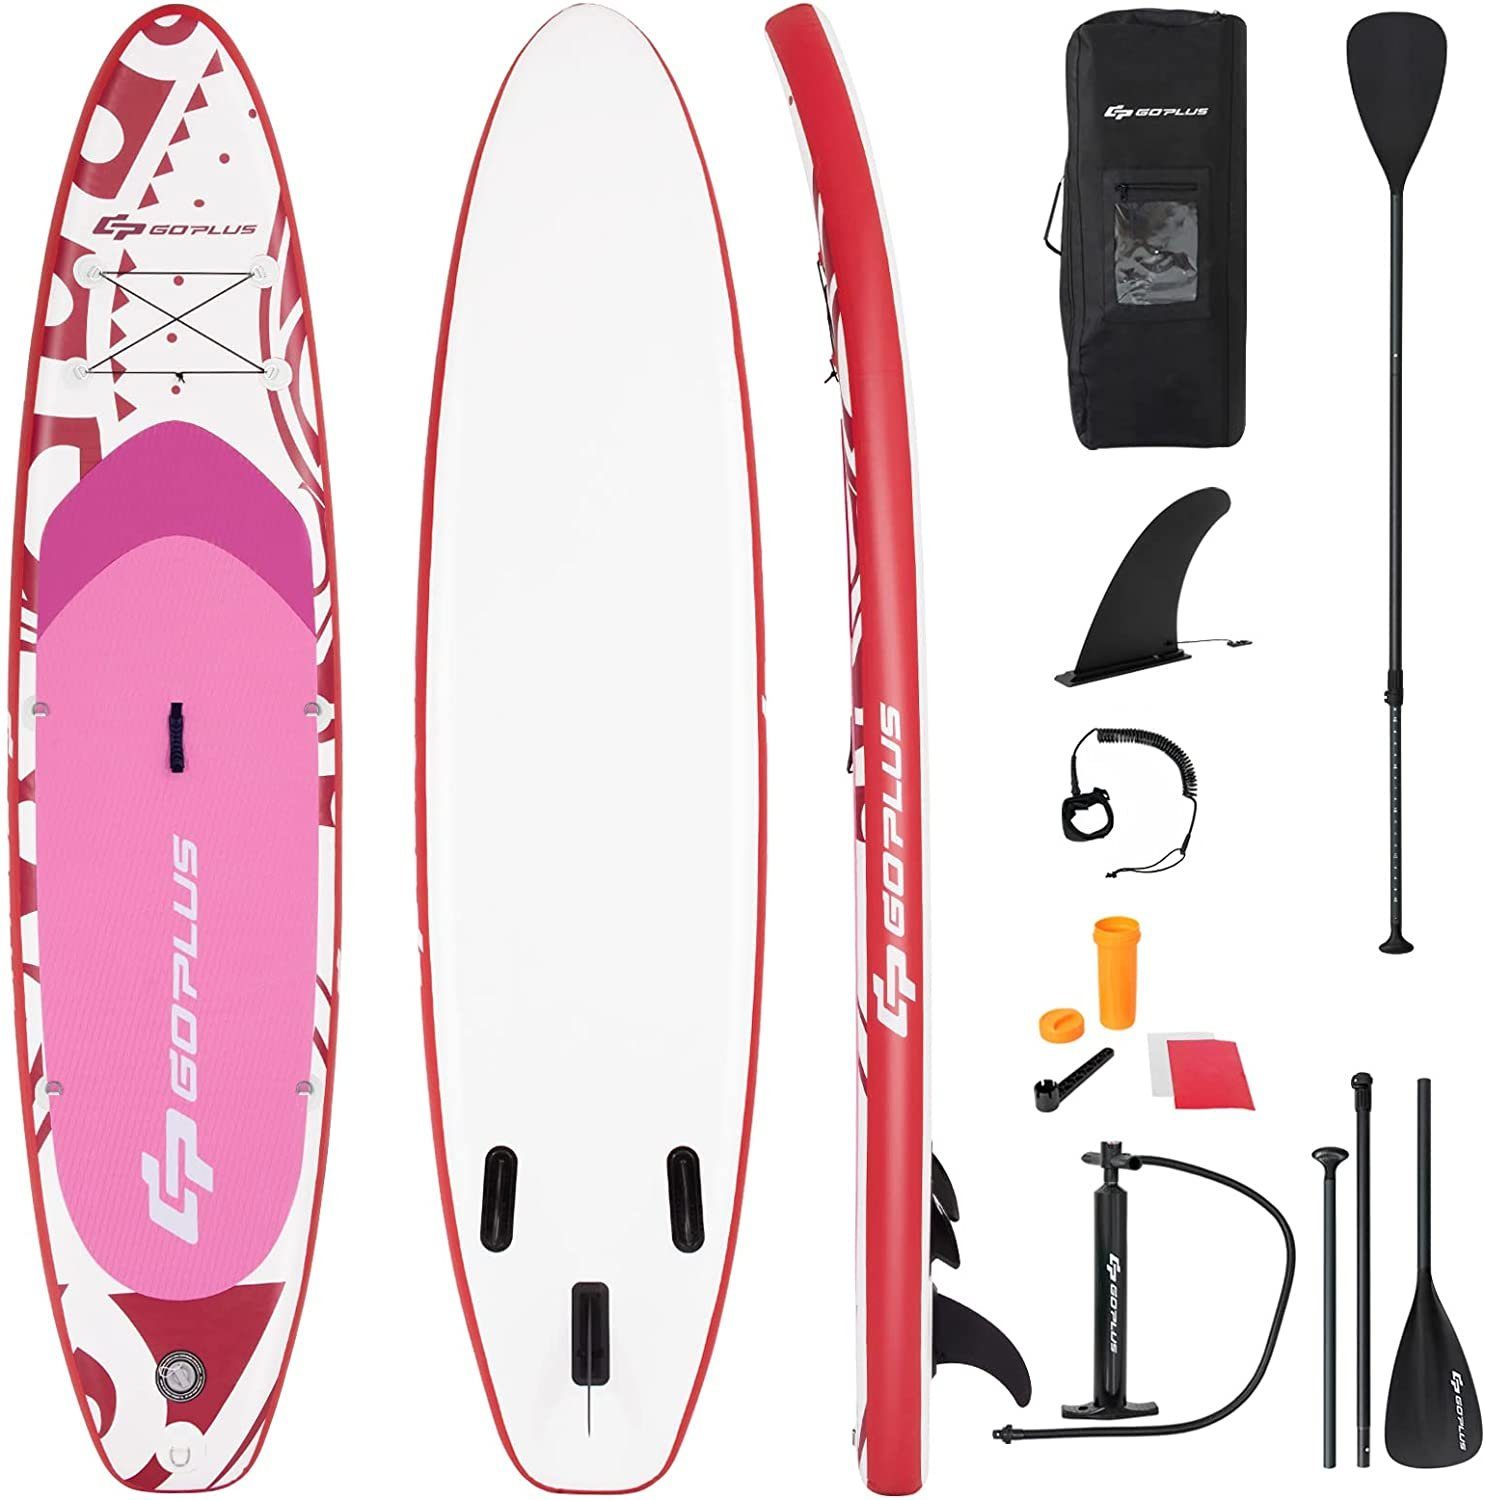 COSTWAY SUP-Board 150kg rosa Up Board, ohne Stand Sitz, Paddling bis